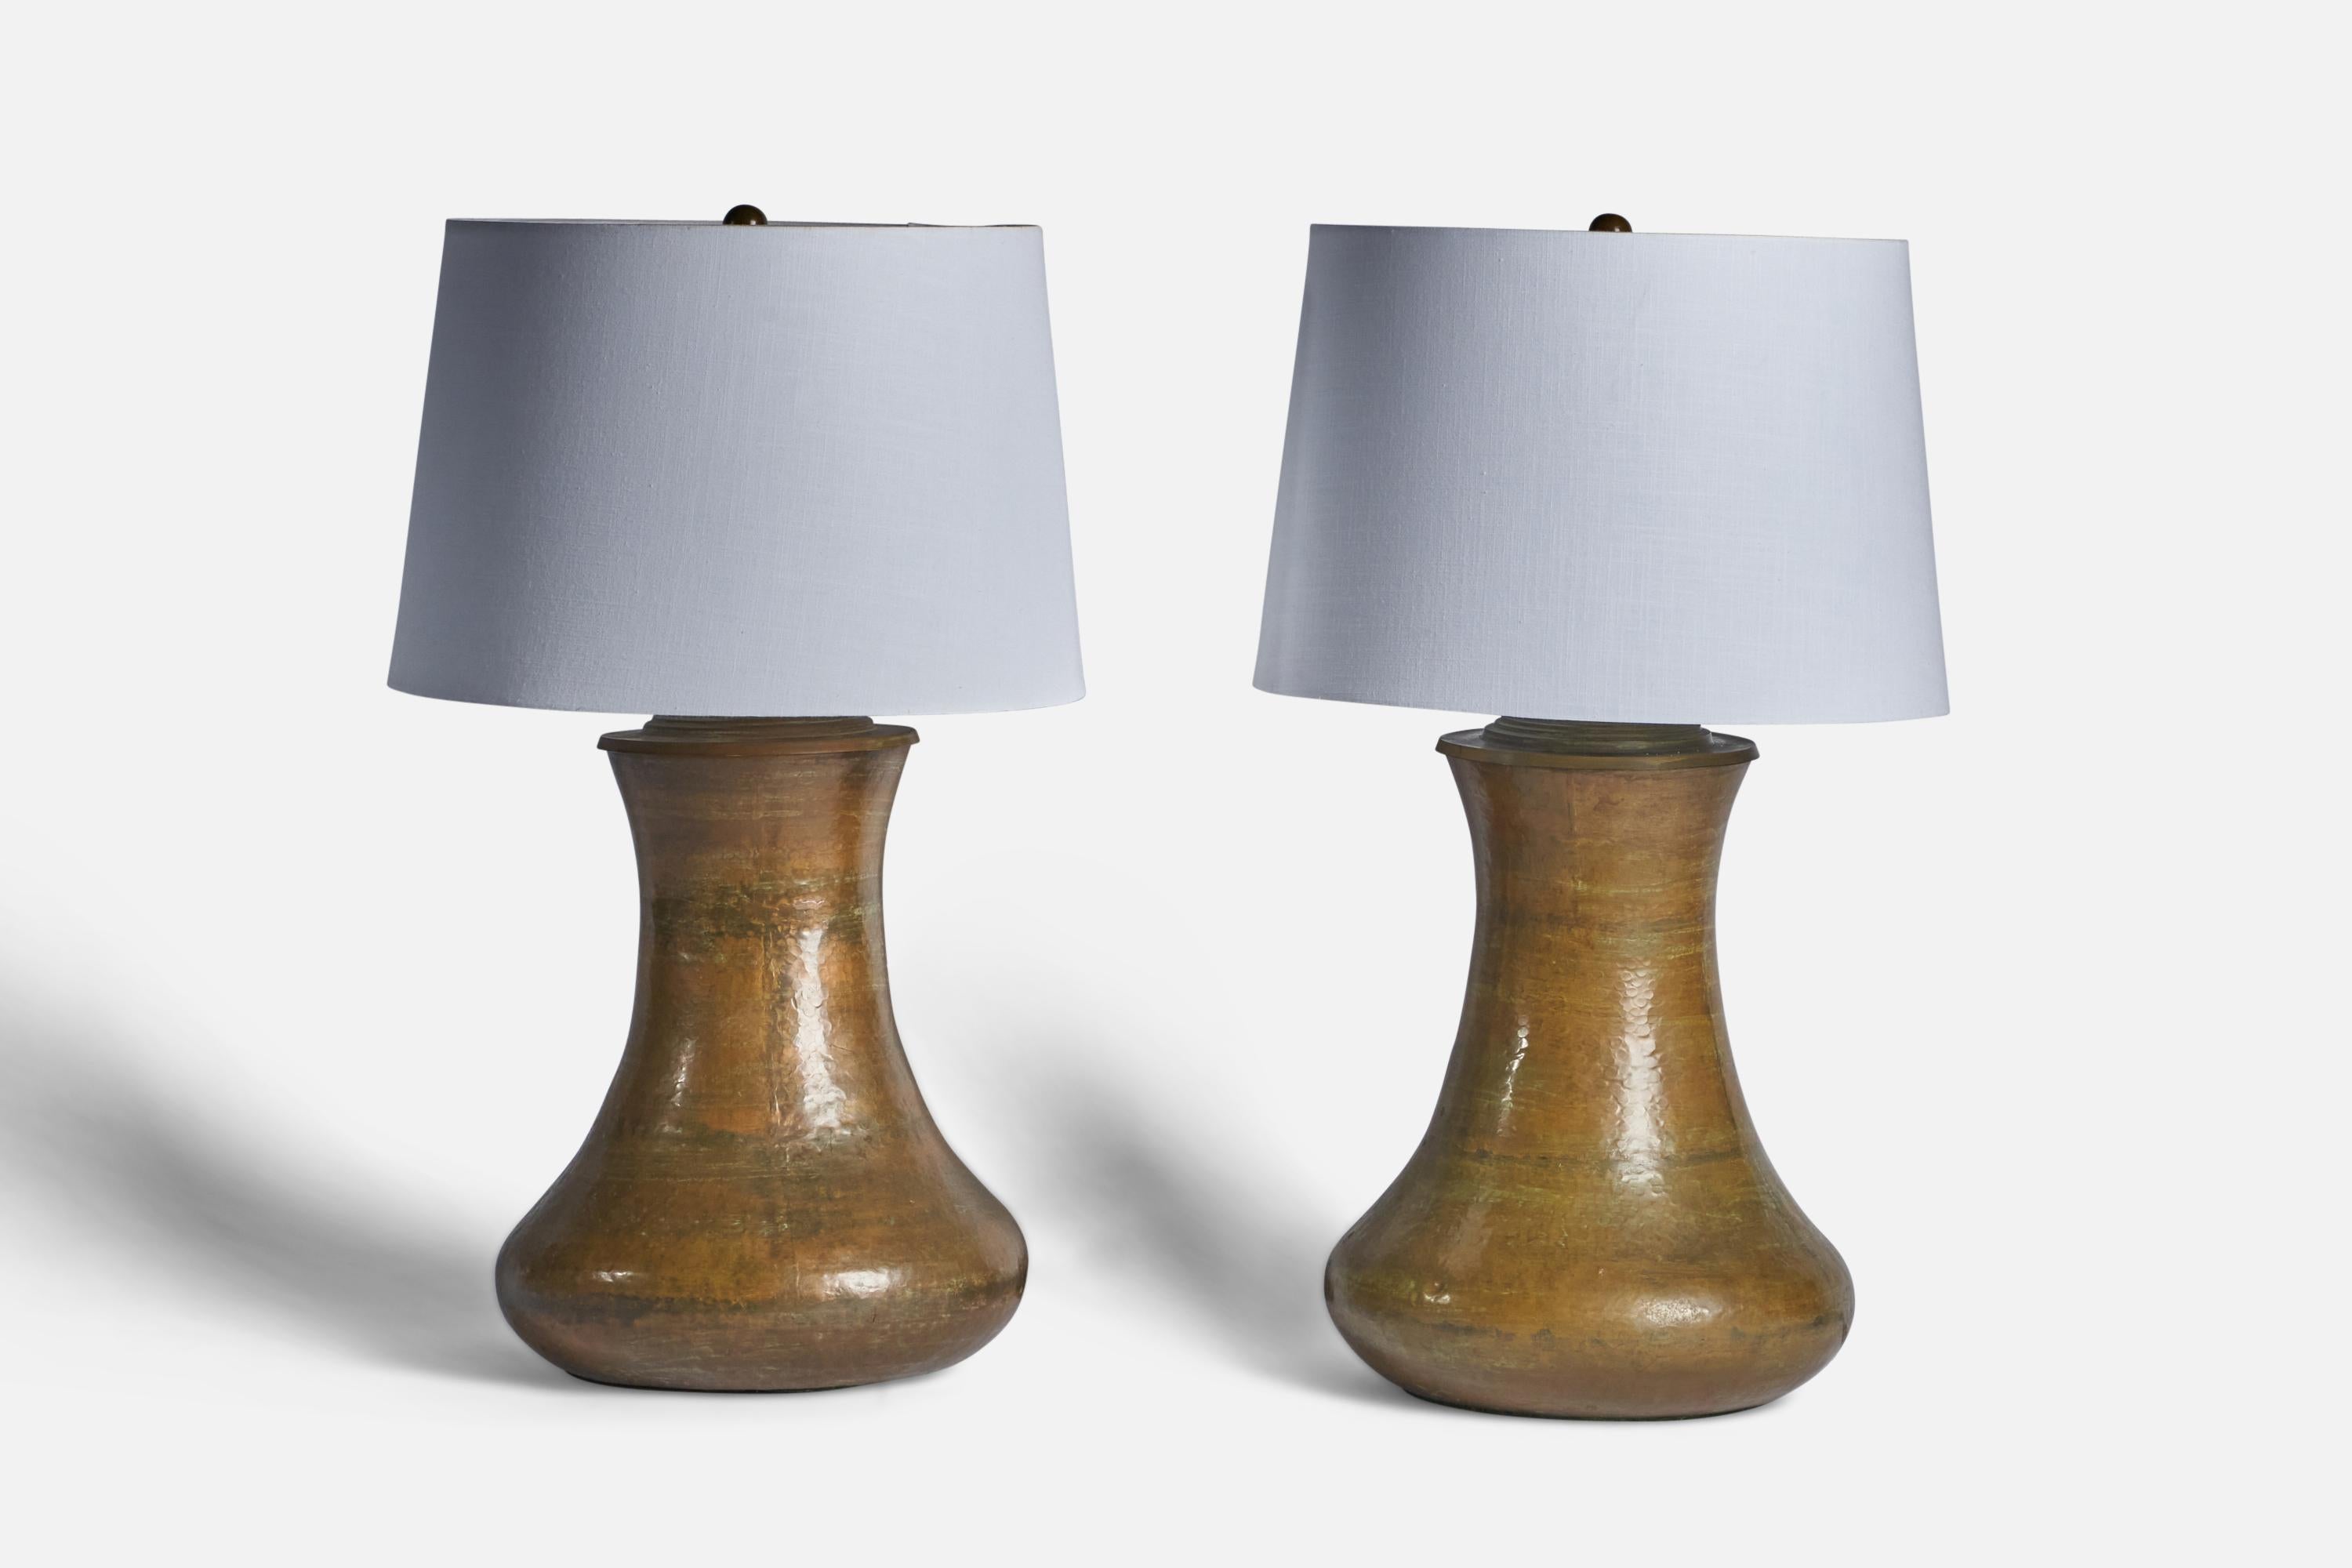 A pair of sizeable brass table lamps designed and produced in the US, c. 1970s.

Dimensions of Lamp (inches): 24.5” H x 12” Diameter
Dimensions of Shade (inches): 13” Top Diameter x 15” Bottom Diameter x 10” H 
Dimensions of Lamp with Shade